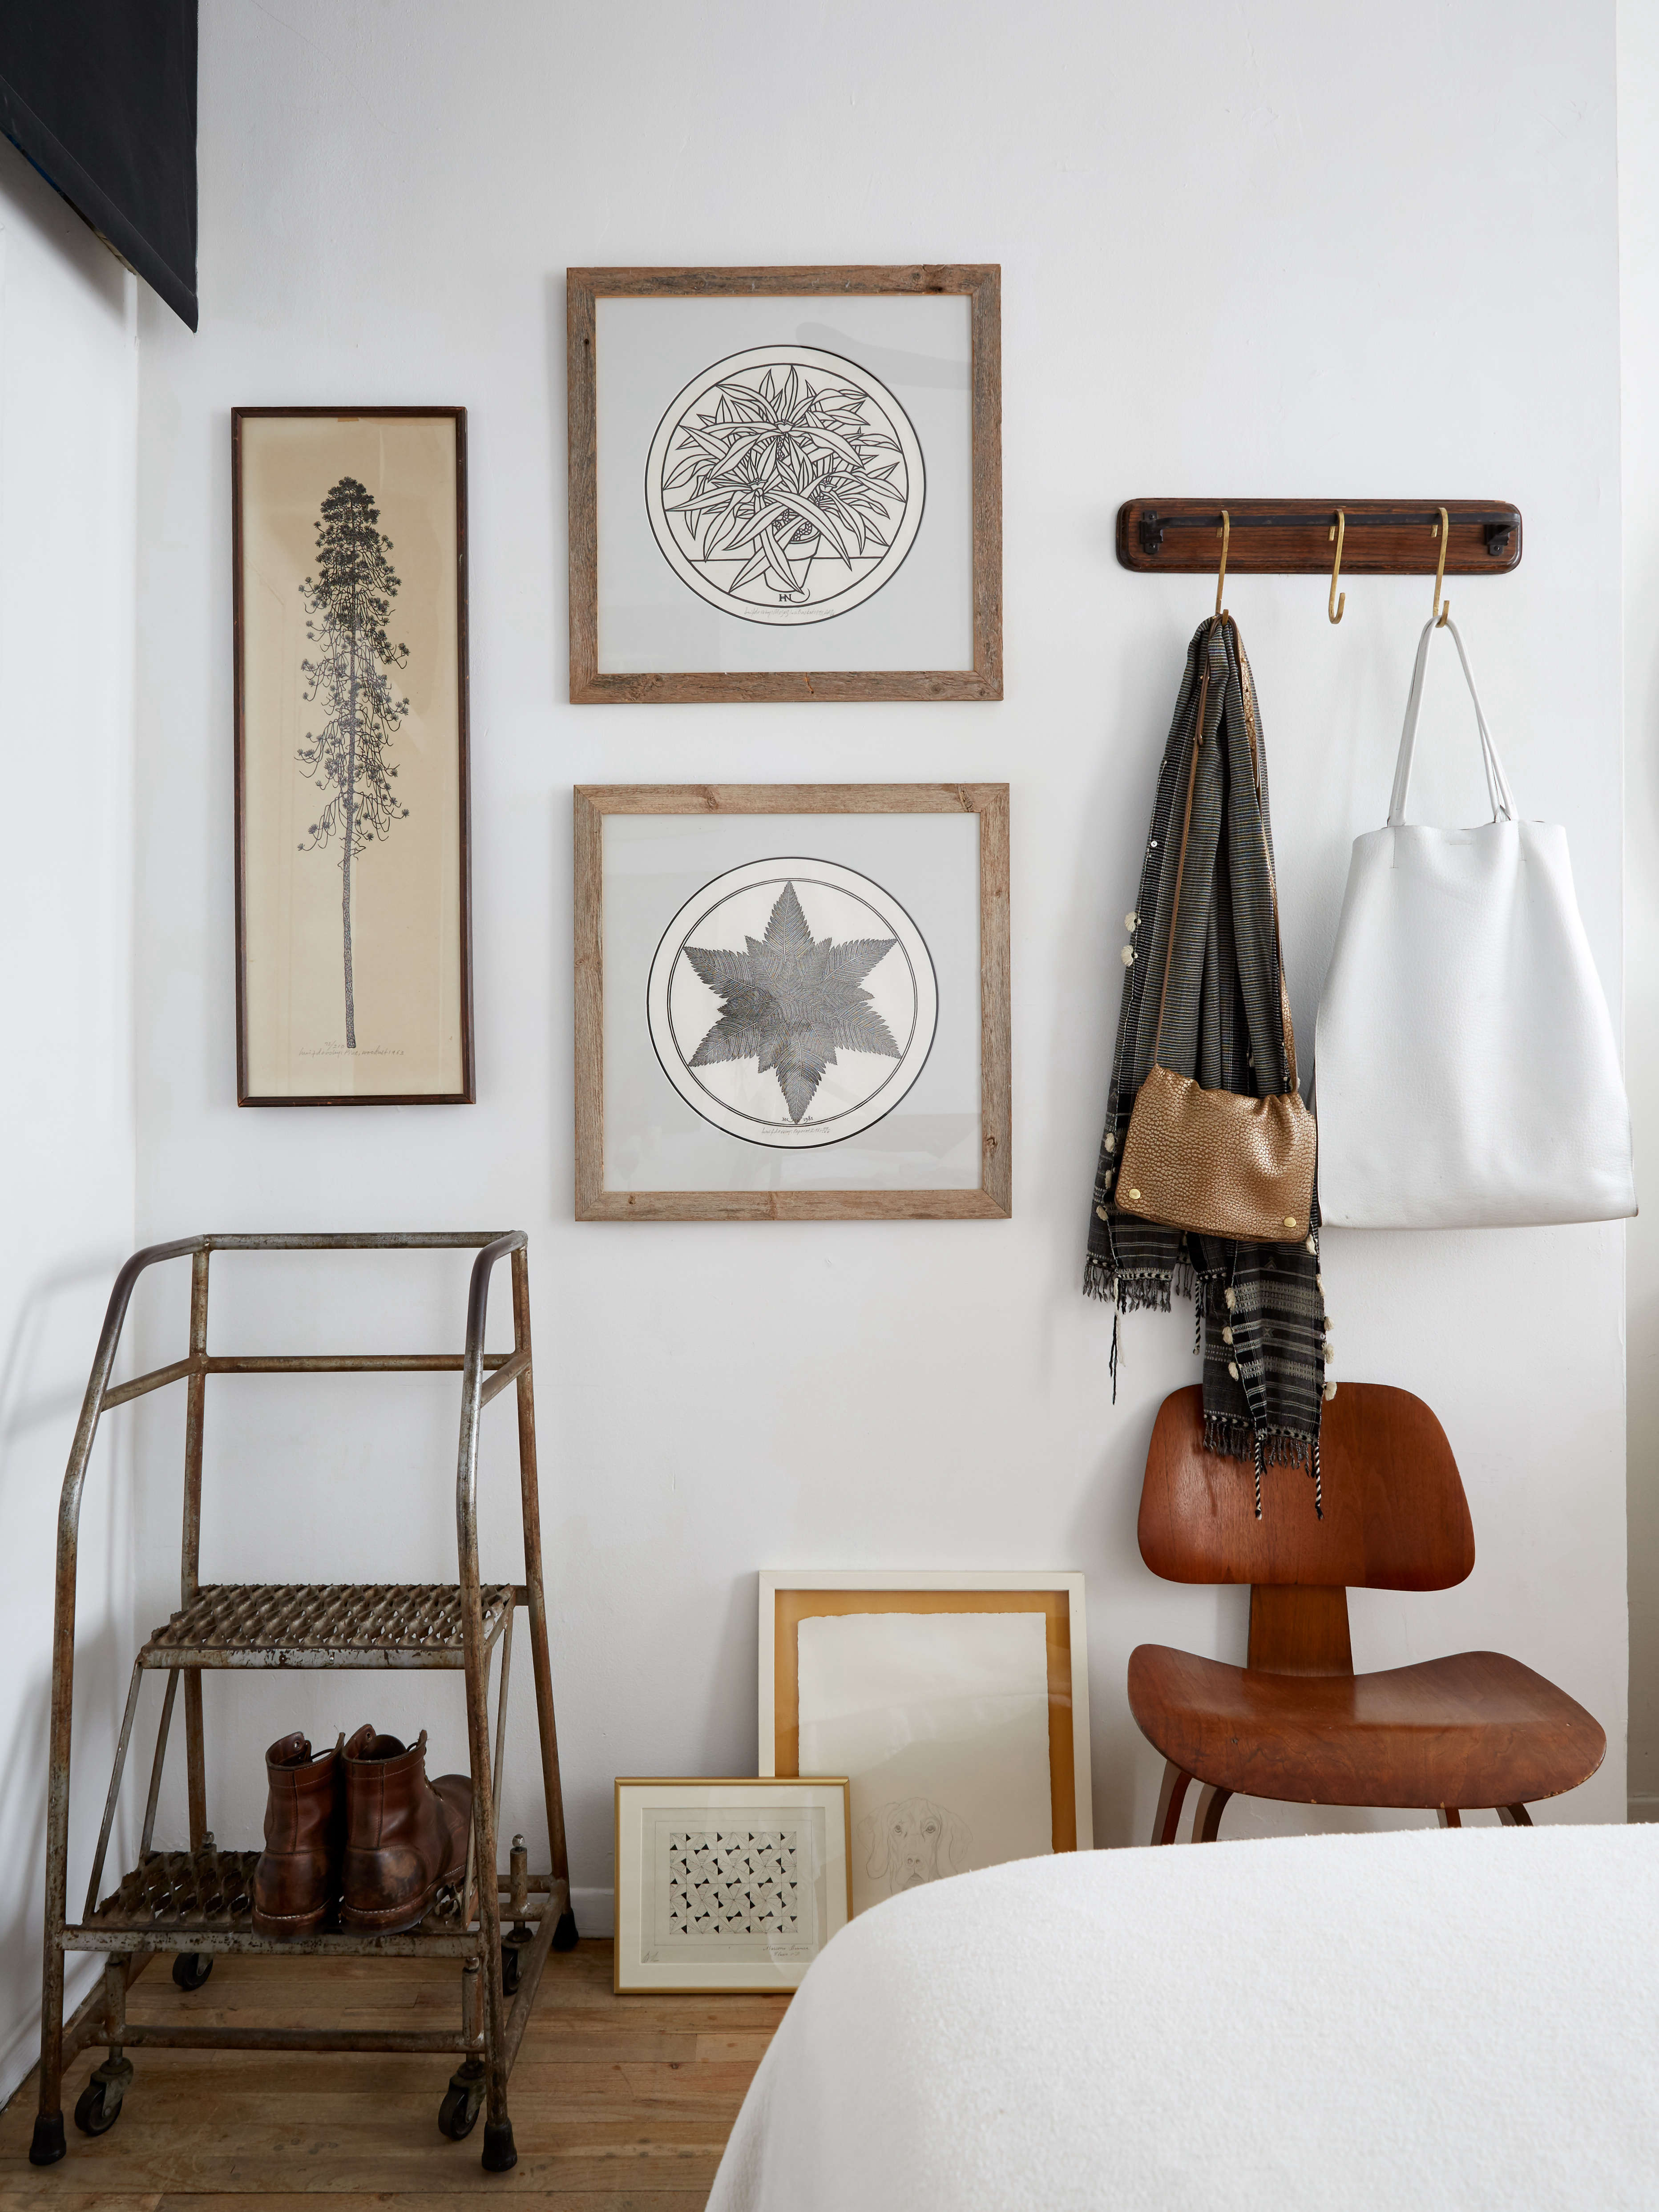 Framed black and white prints and an industrial step stool on wheels in an artful apartment bedroom